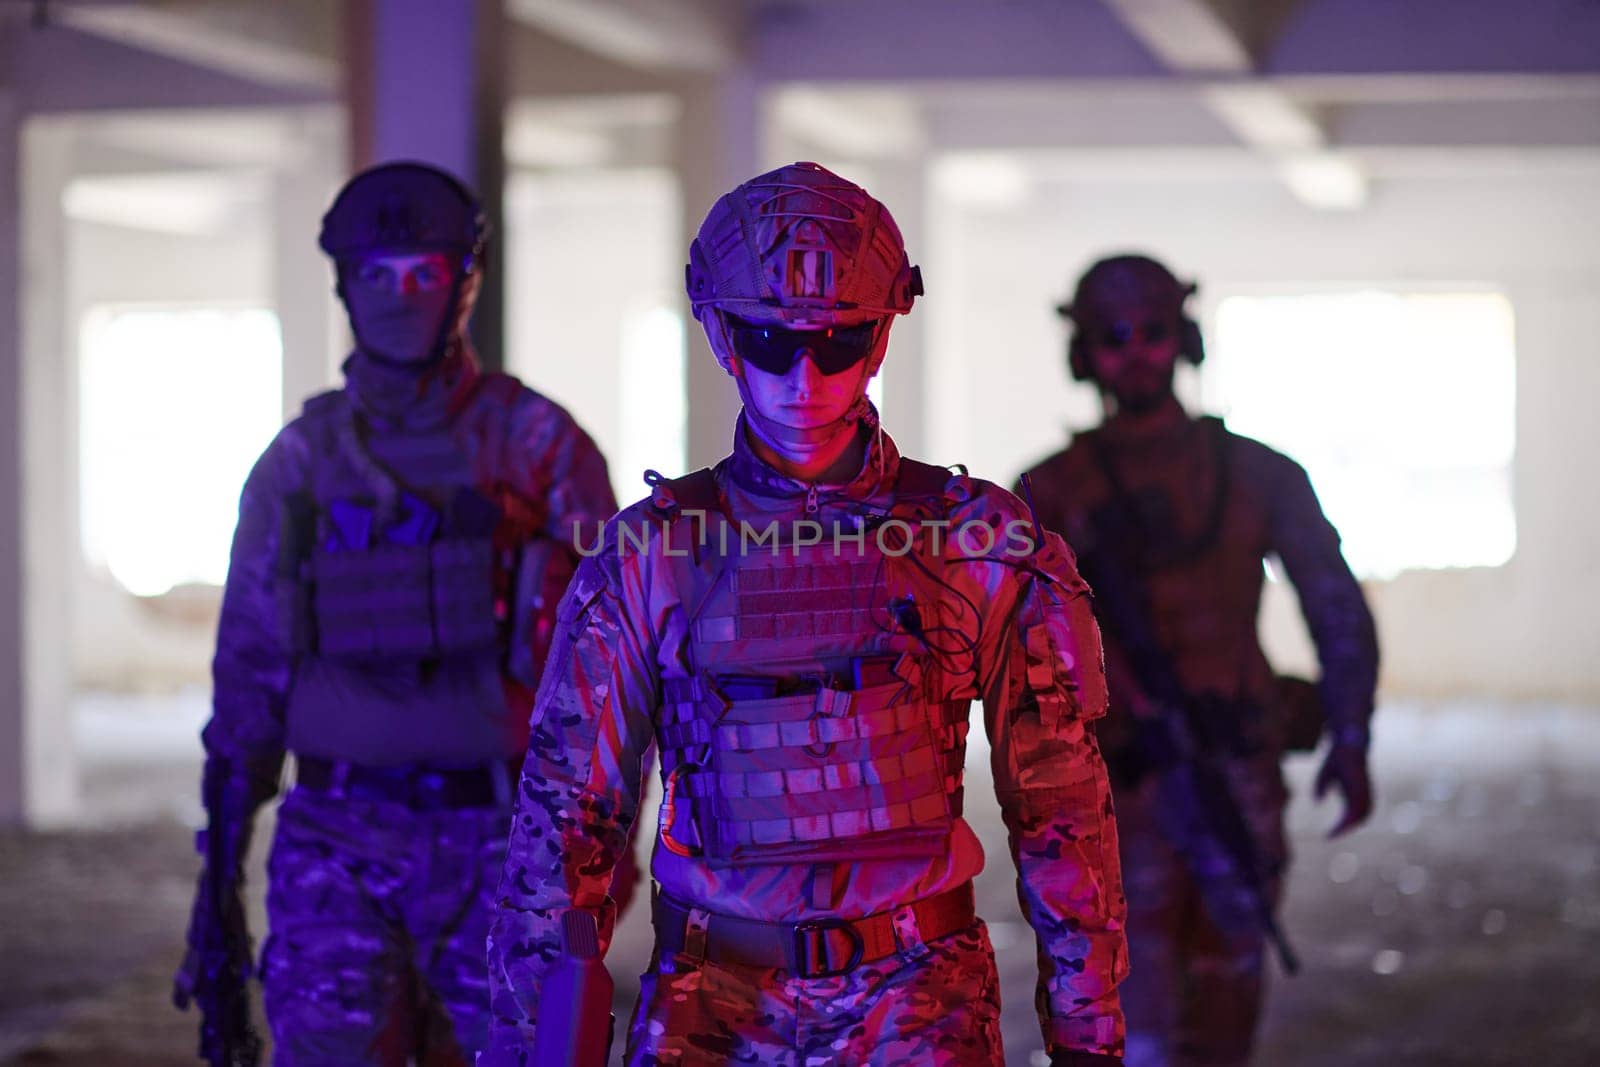 soldier squad team walking in urban environment colored lightis.